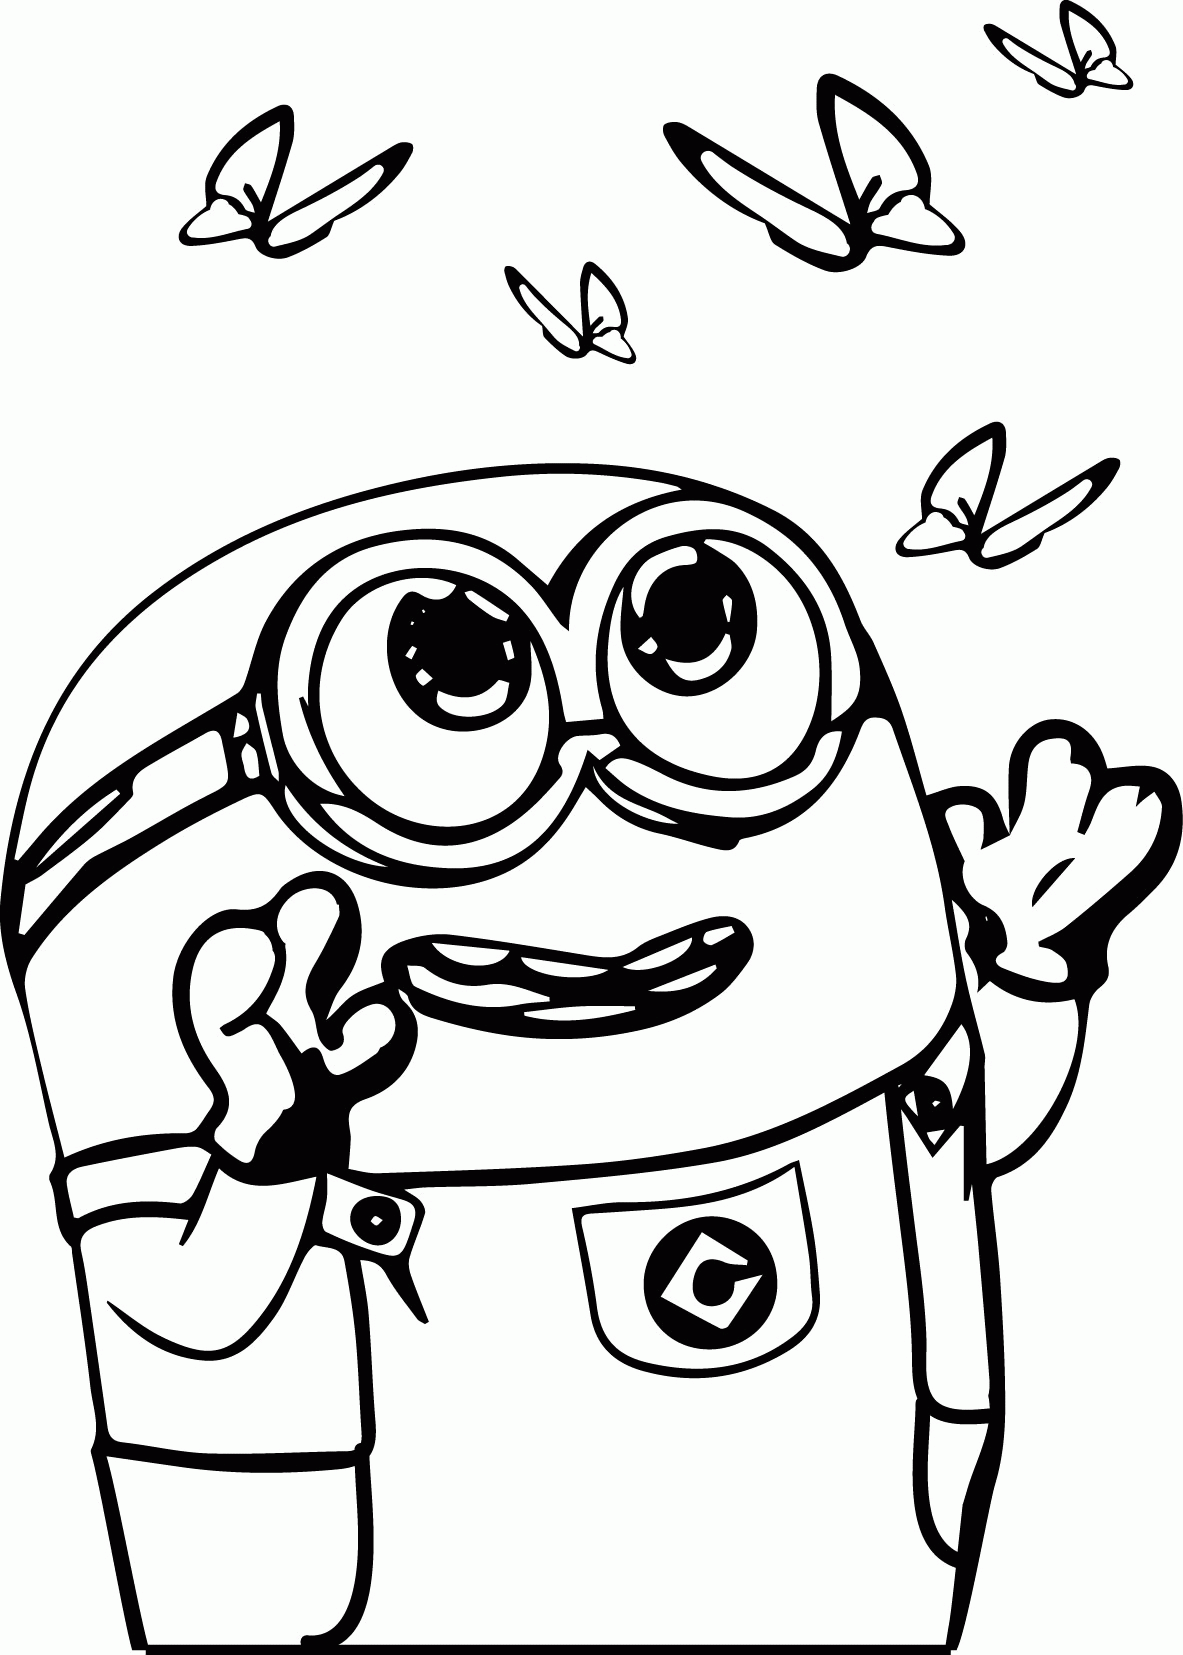 Download Minions Coloring Pages Bob - Coloring Home